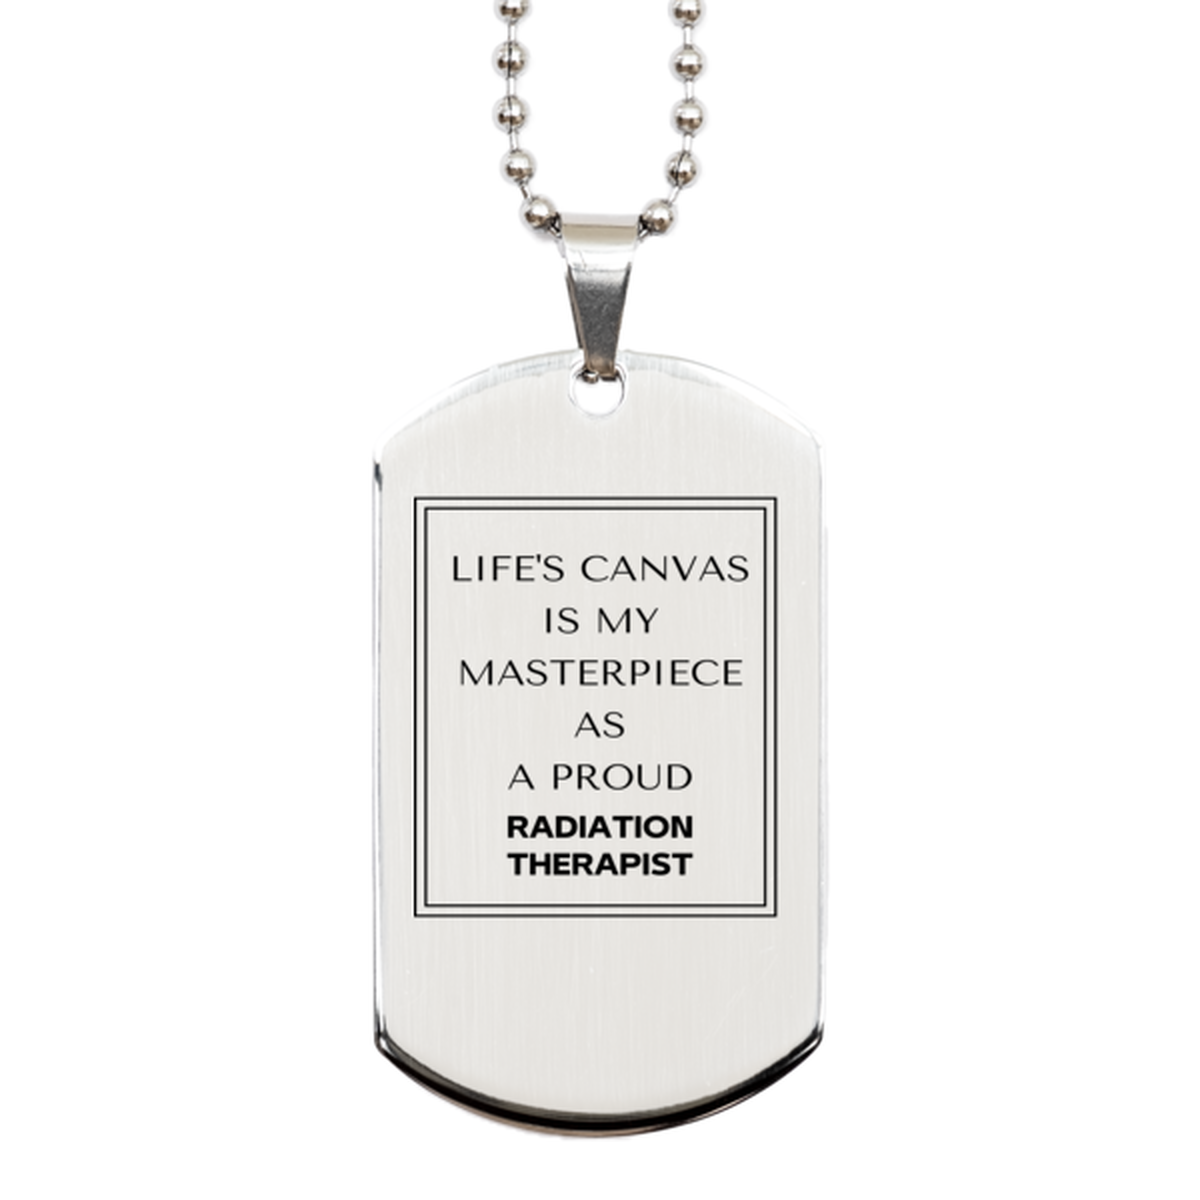 Proud Radiation Therapist Gifts, Life's canvas is my masterpiece, Epic Birthday Christmas Unique Silver Dog Tag For Radiation Therapist, Coworkers, Men, Women, Friends